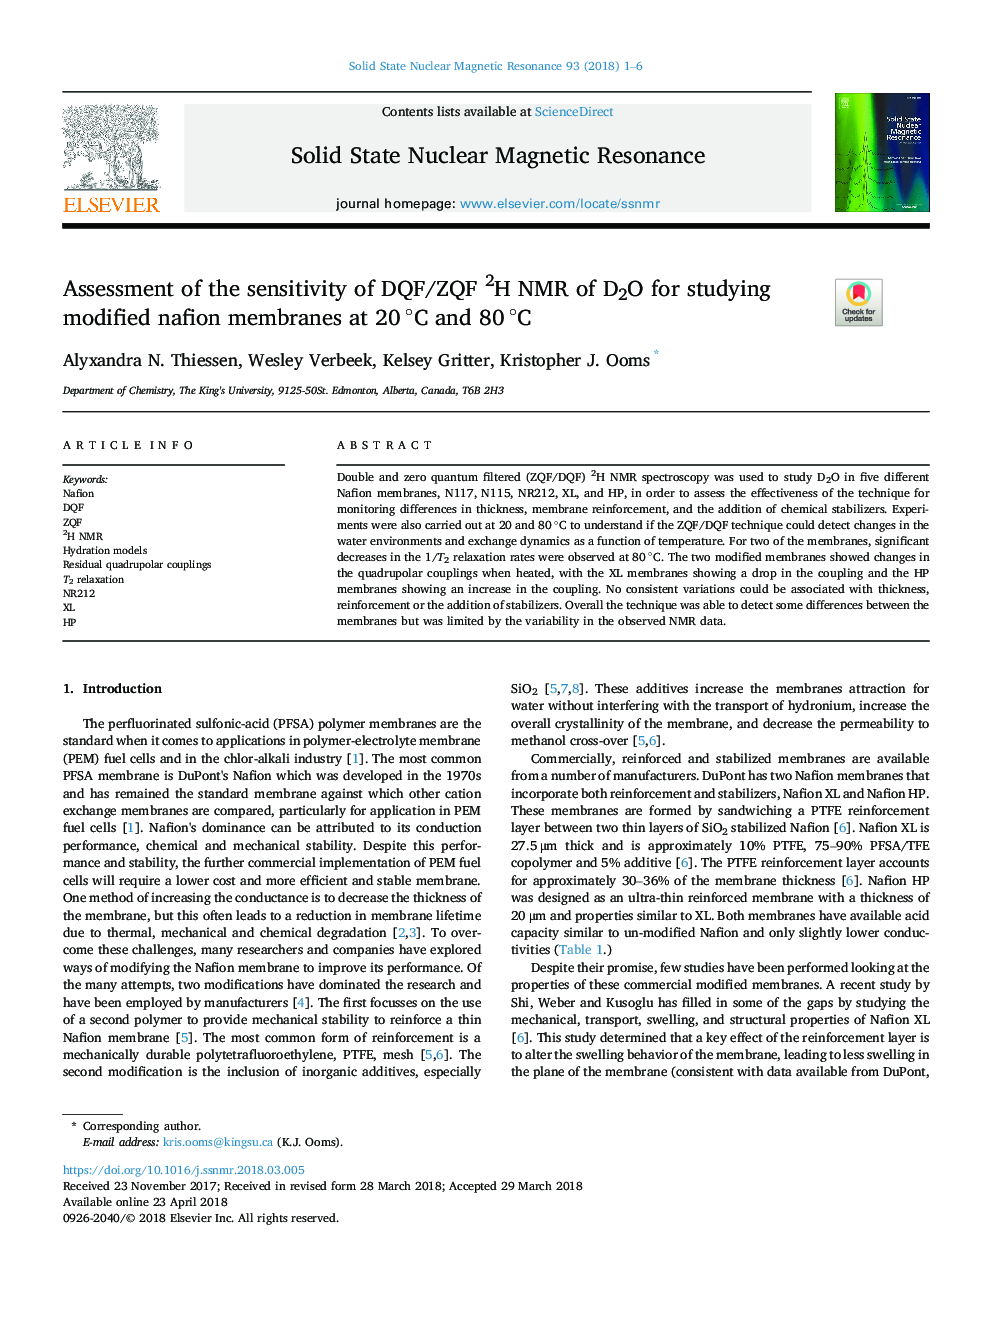 Assessment of the sensitivity of DQF/ZQF 2H NMR of D2O for studying modified nafion membranes at 20â¯Â°C and 80â¯Â°C